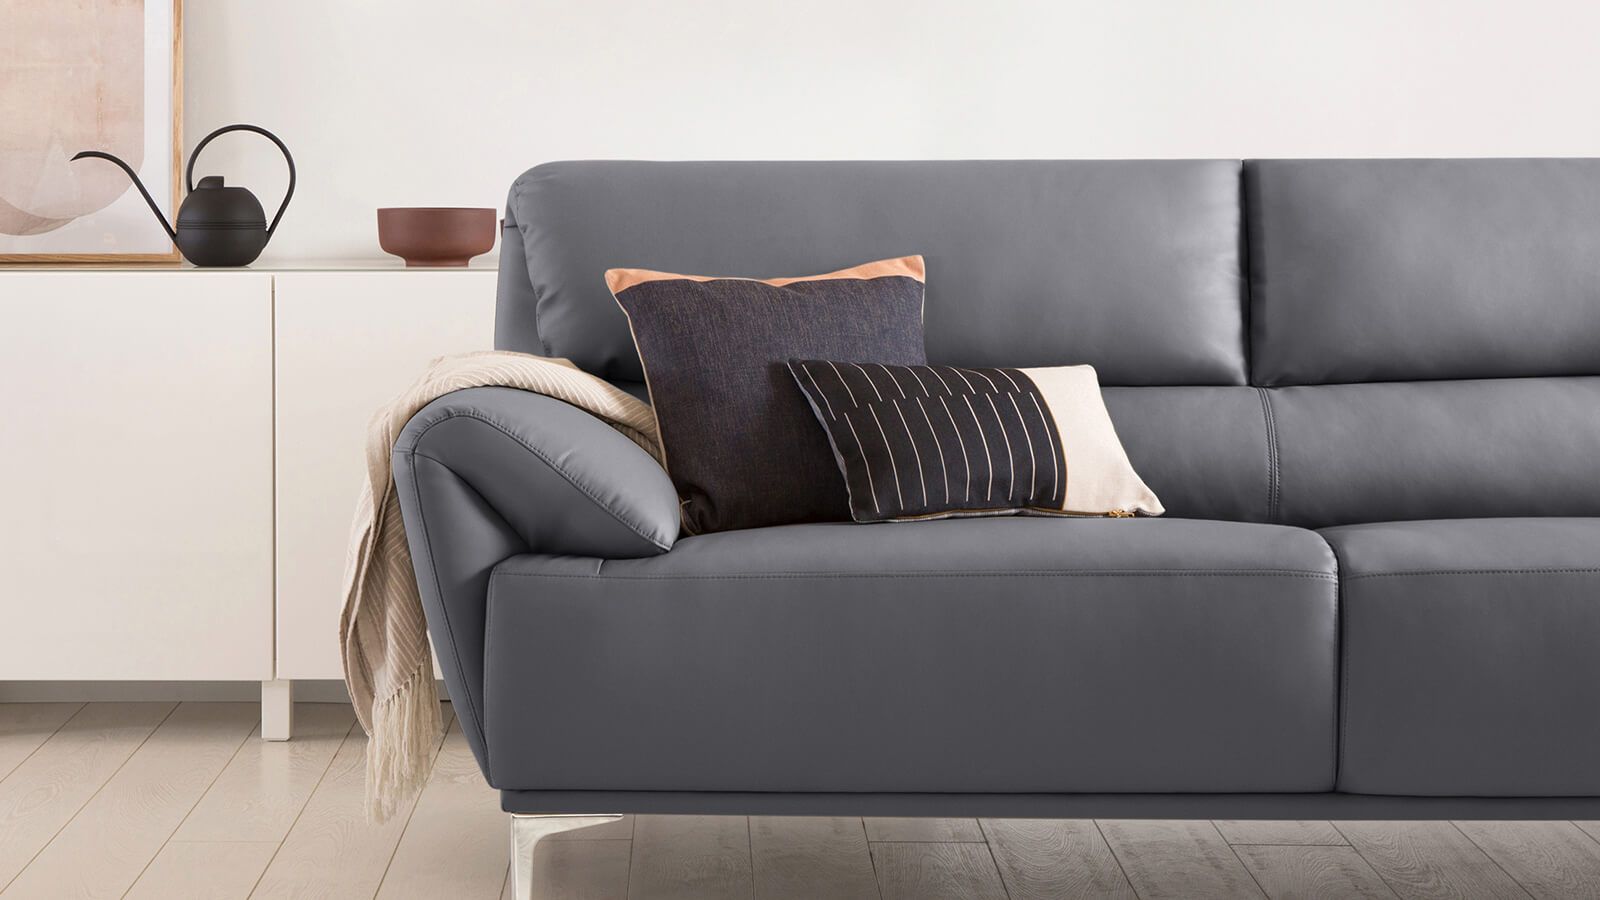 Furniture And Choice’s January sale - free delivery & free returns on all orders